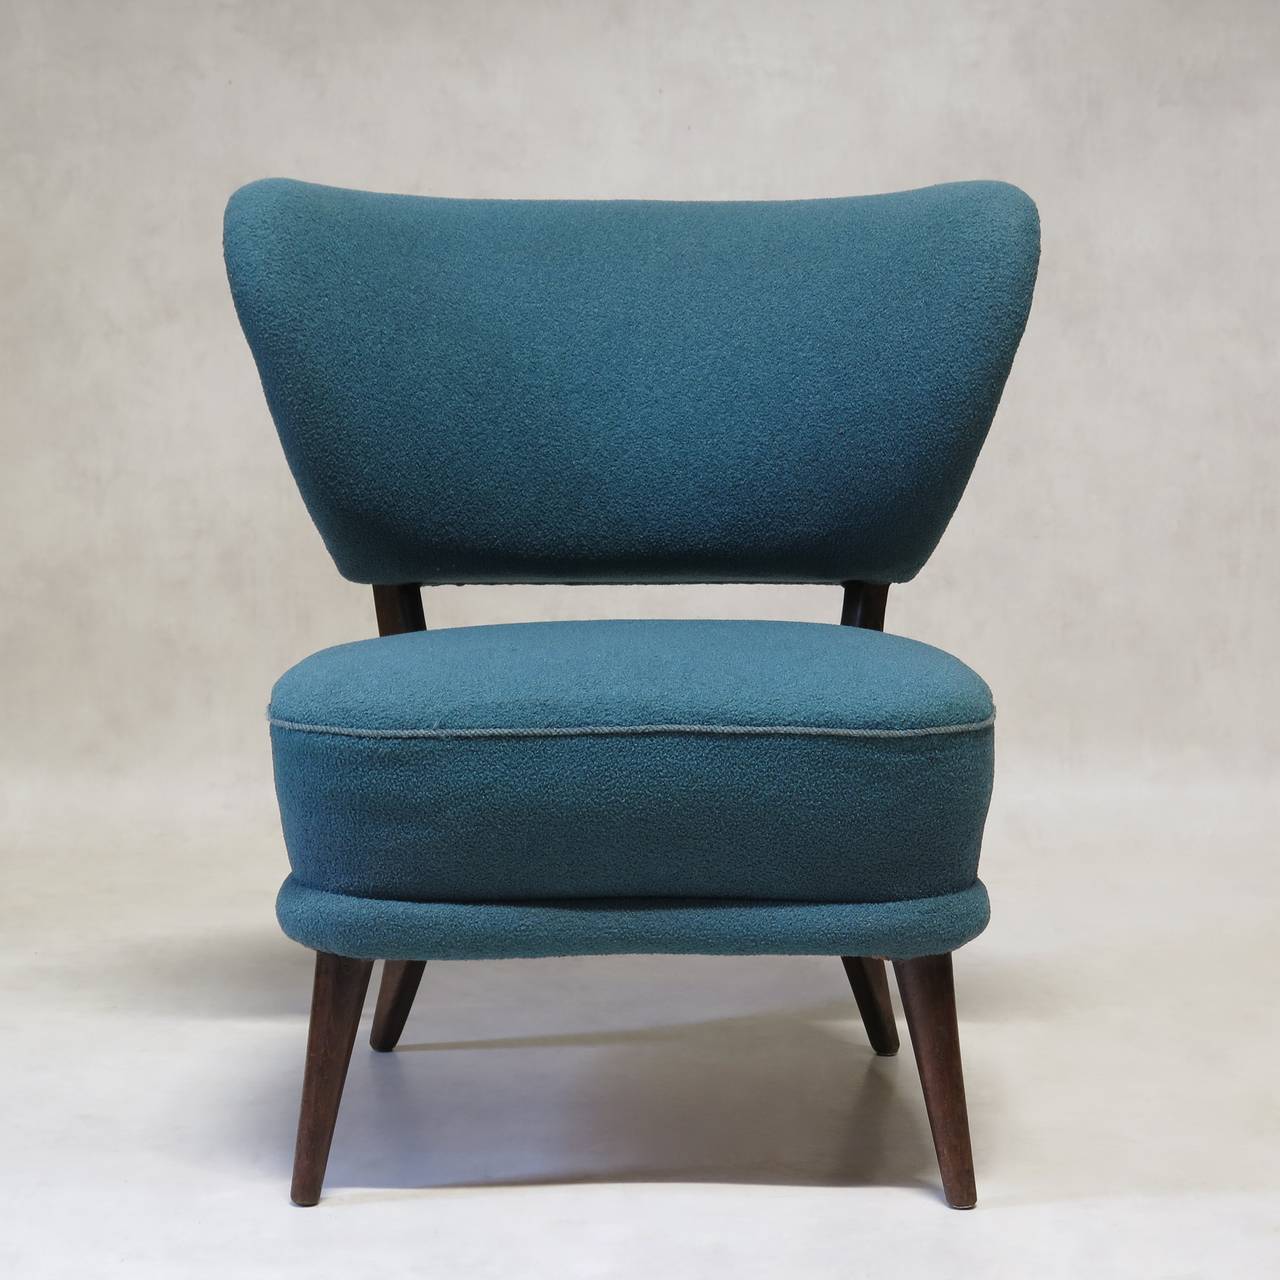 European Pair of Mid-Century Modern Wingback Slipper Chairs For Sale